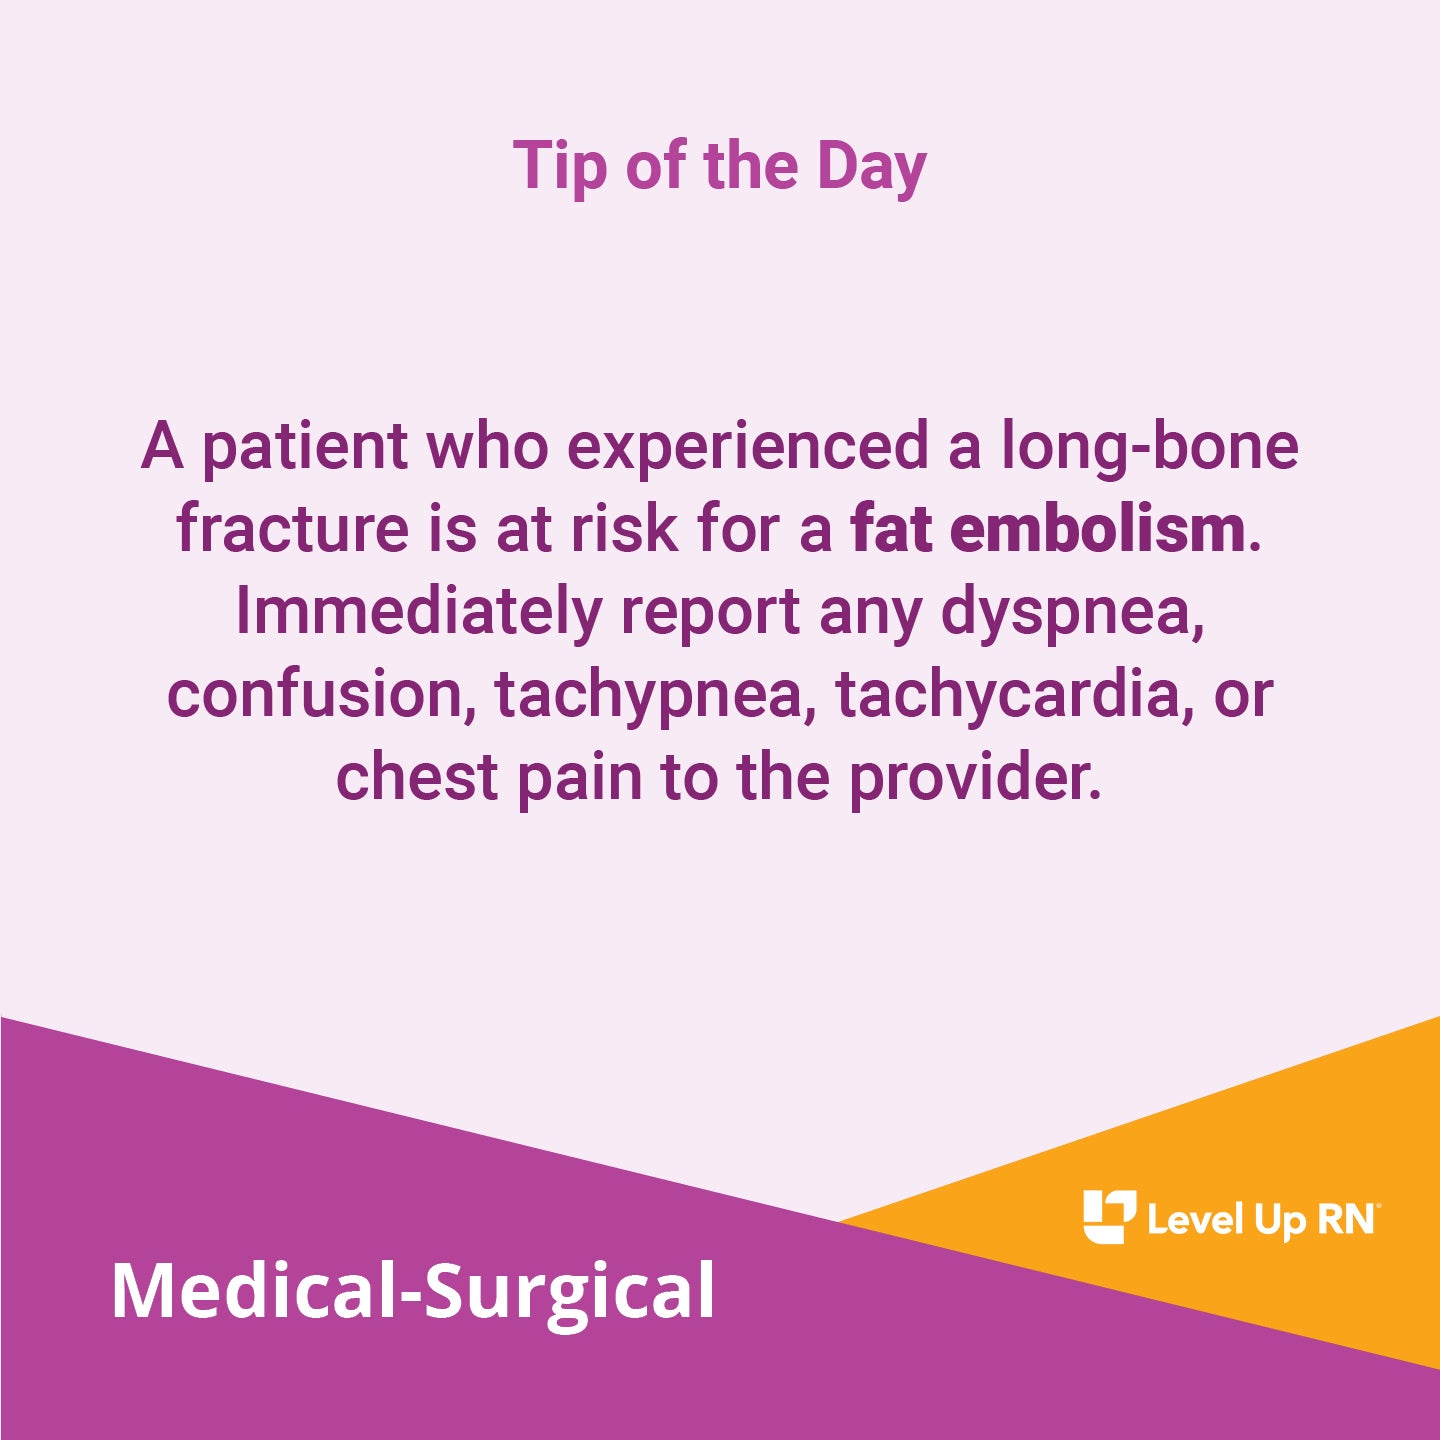 A patient who experienced a long-bone fracture is at risk for a fat embolism. Immediately report any dyspnea, confusion, tachypnea, tachycardia, or chest pain to the provider.